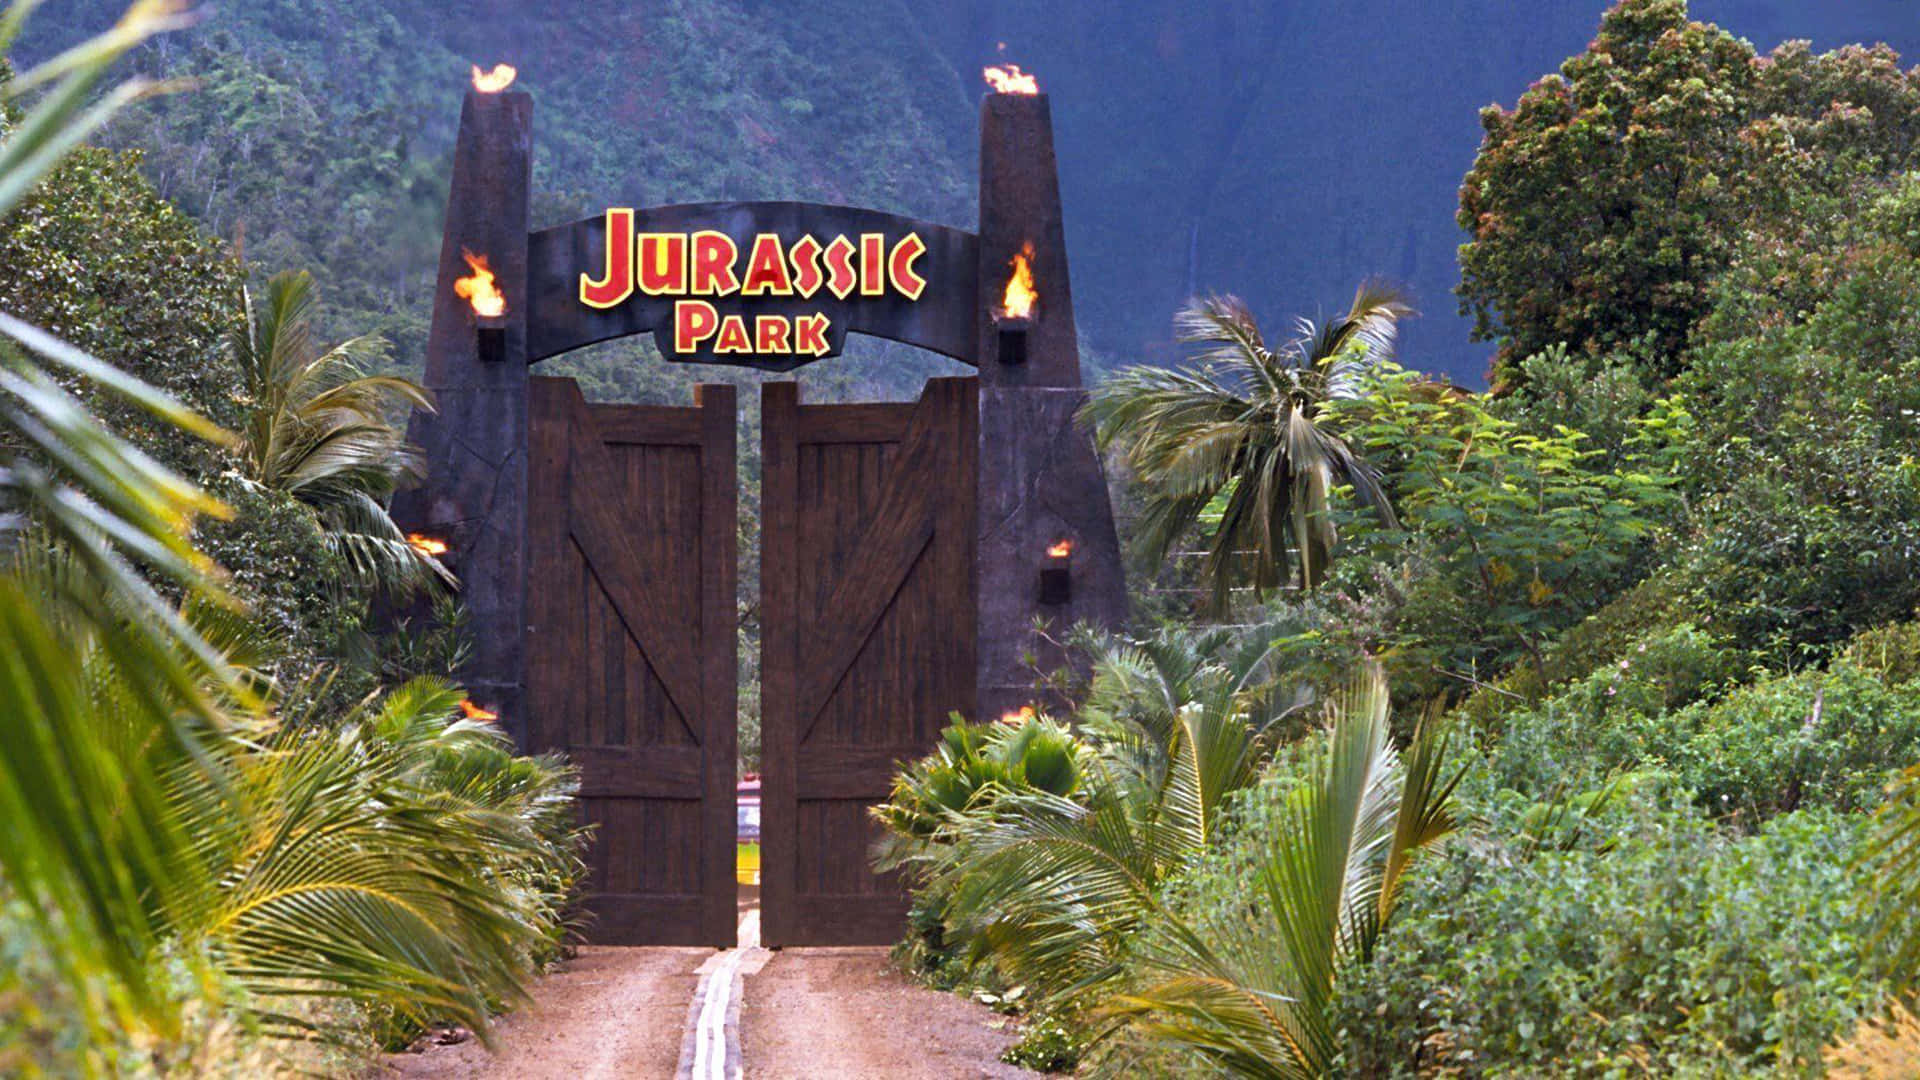 Turn your vacation into a prehistoric adventure at Jurassic World.